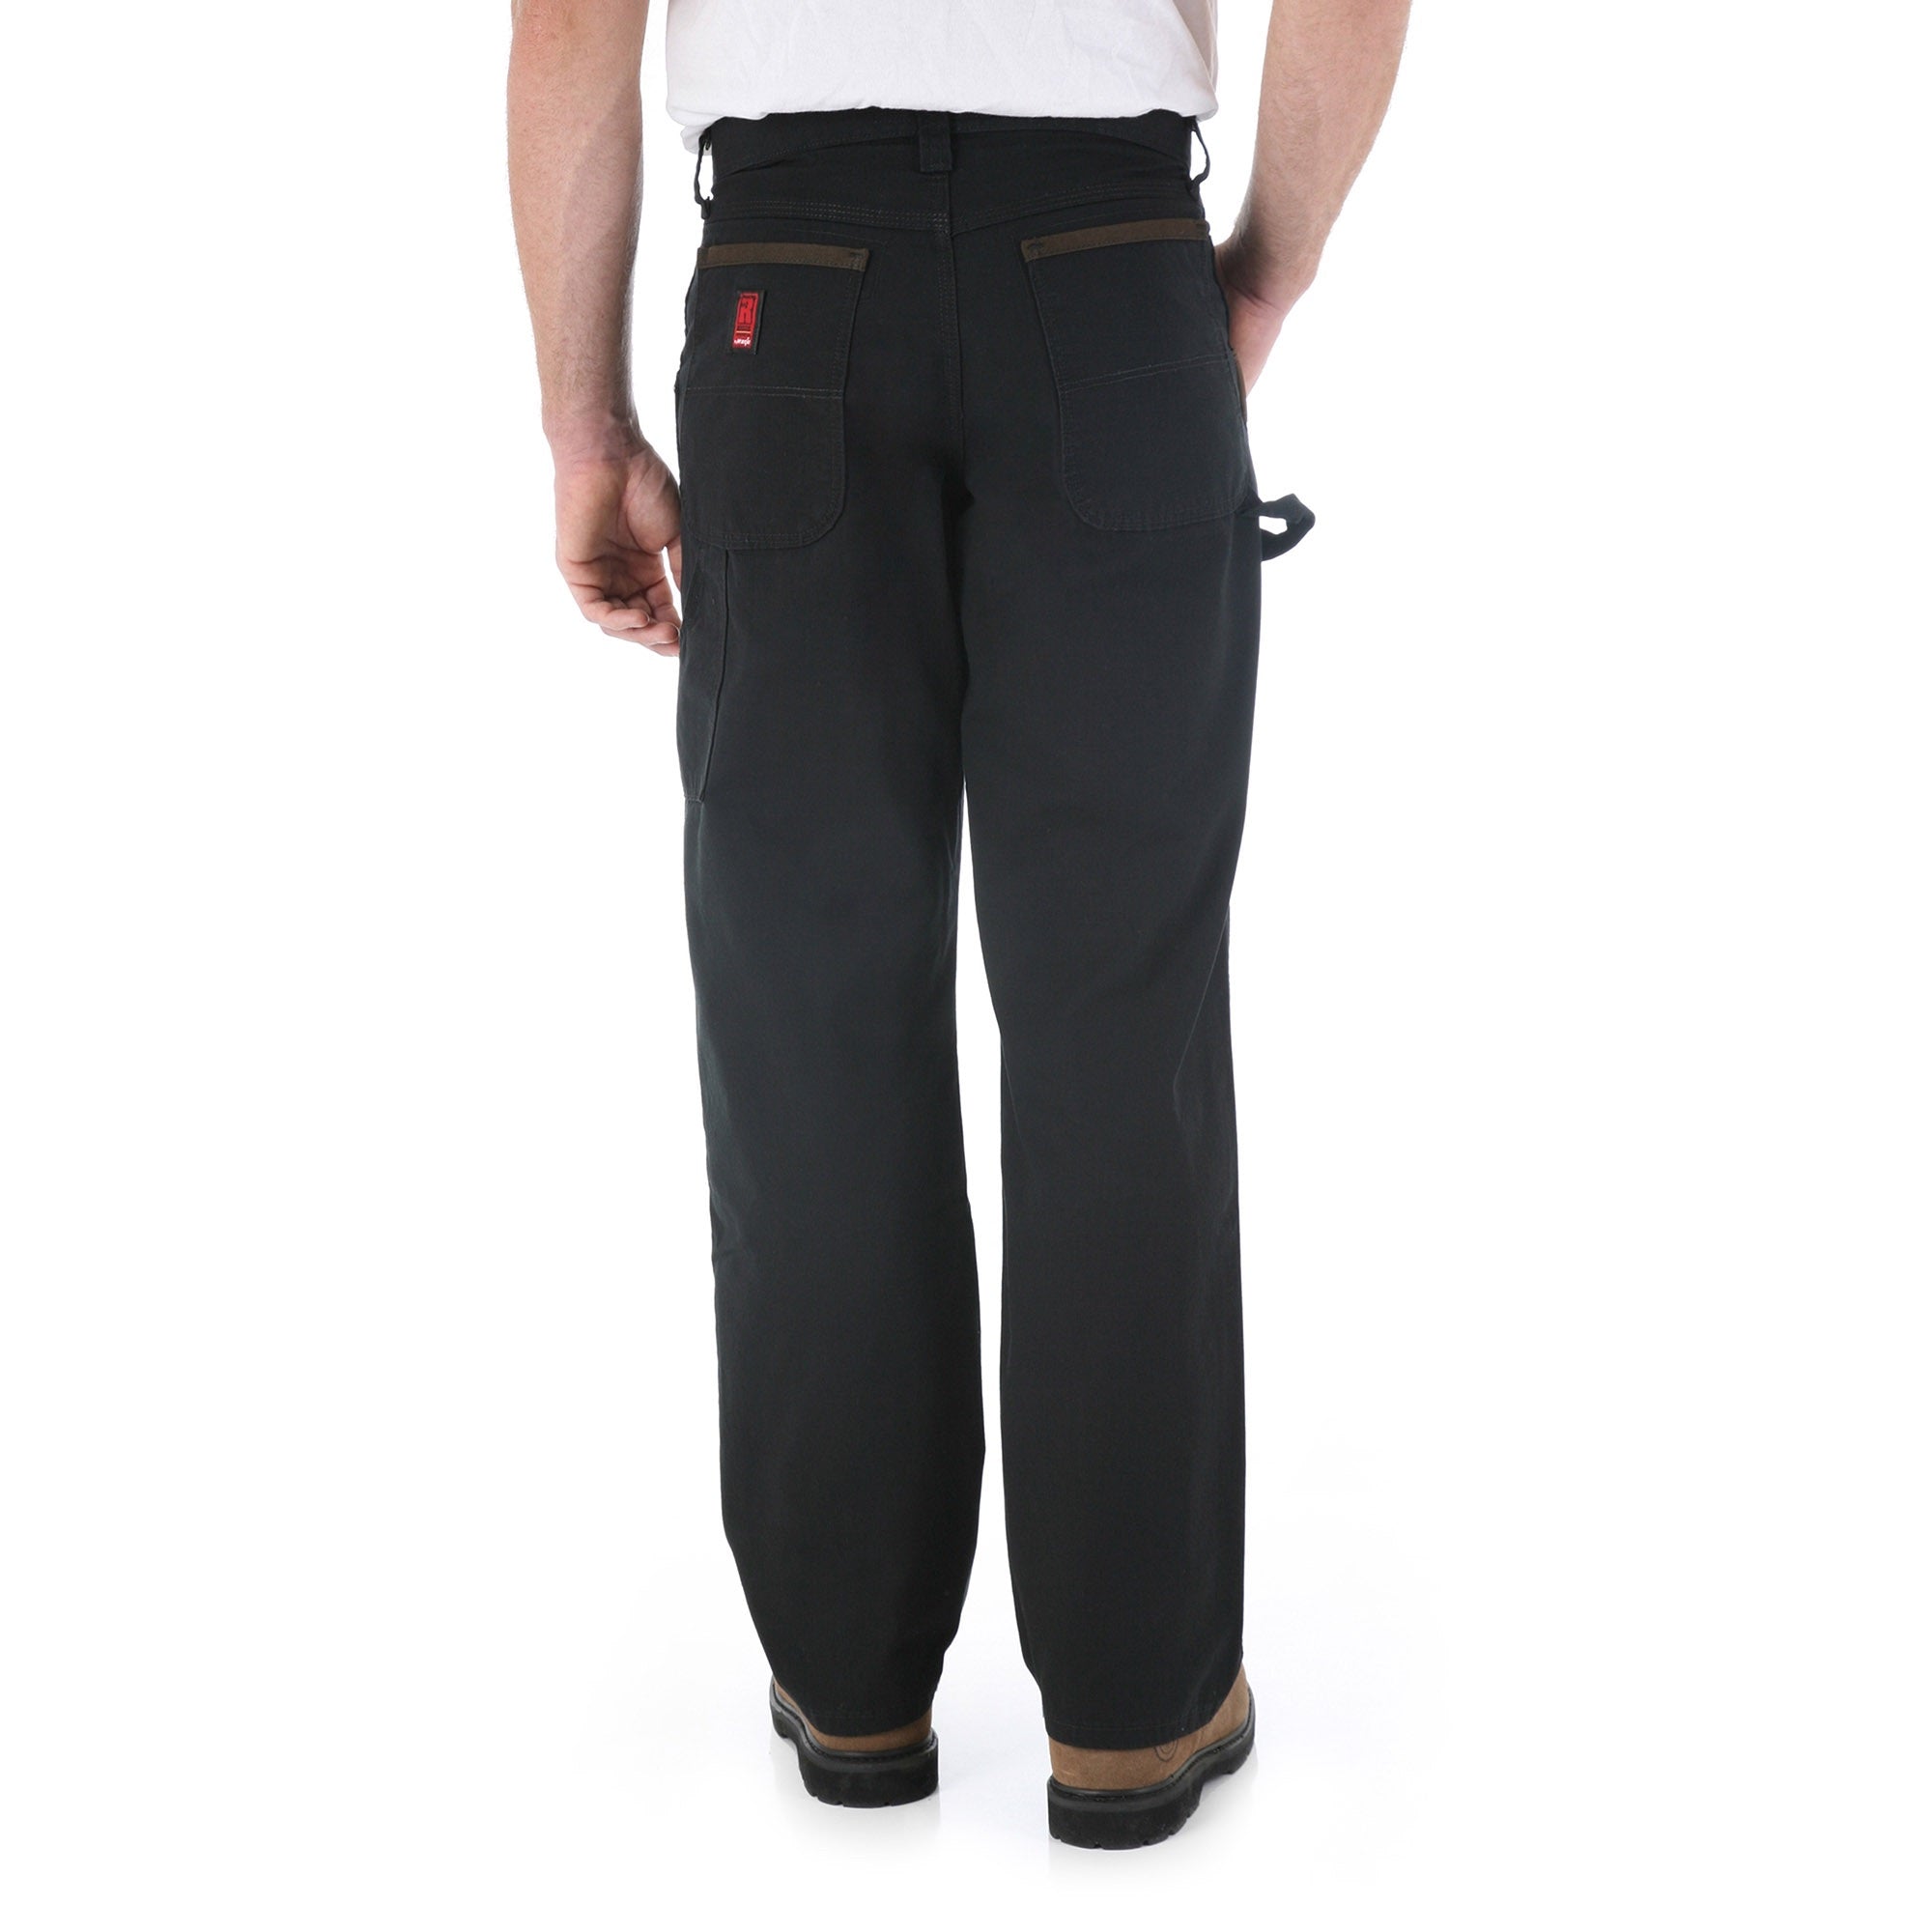 Men's Wrangler Riggs Black Pants – Baughman's Western Outfitters